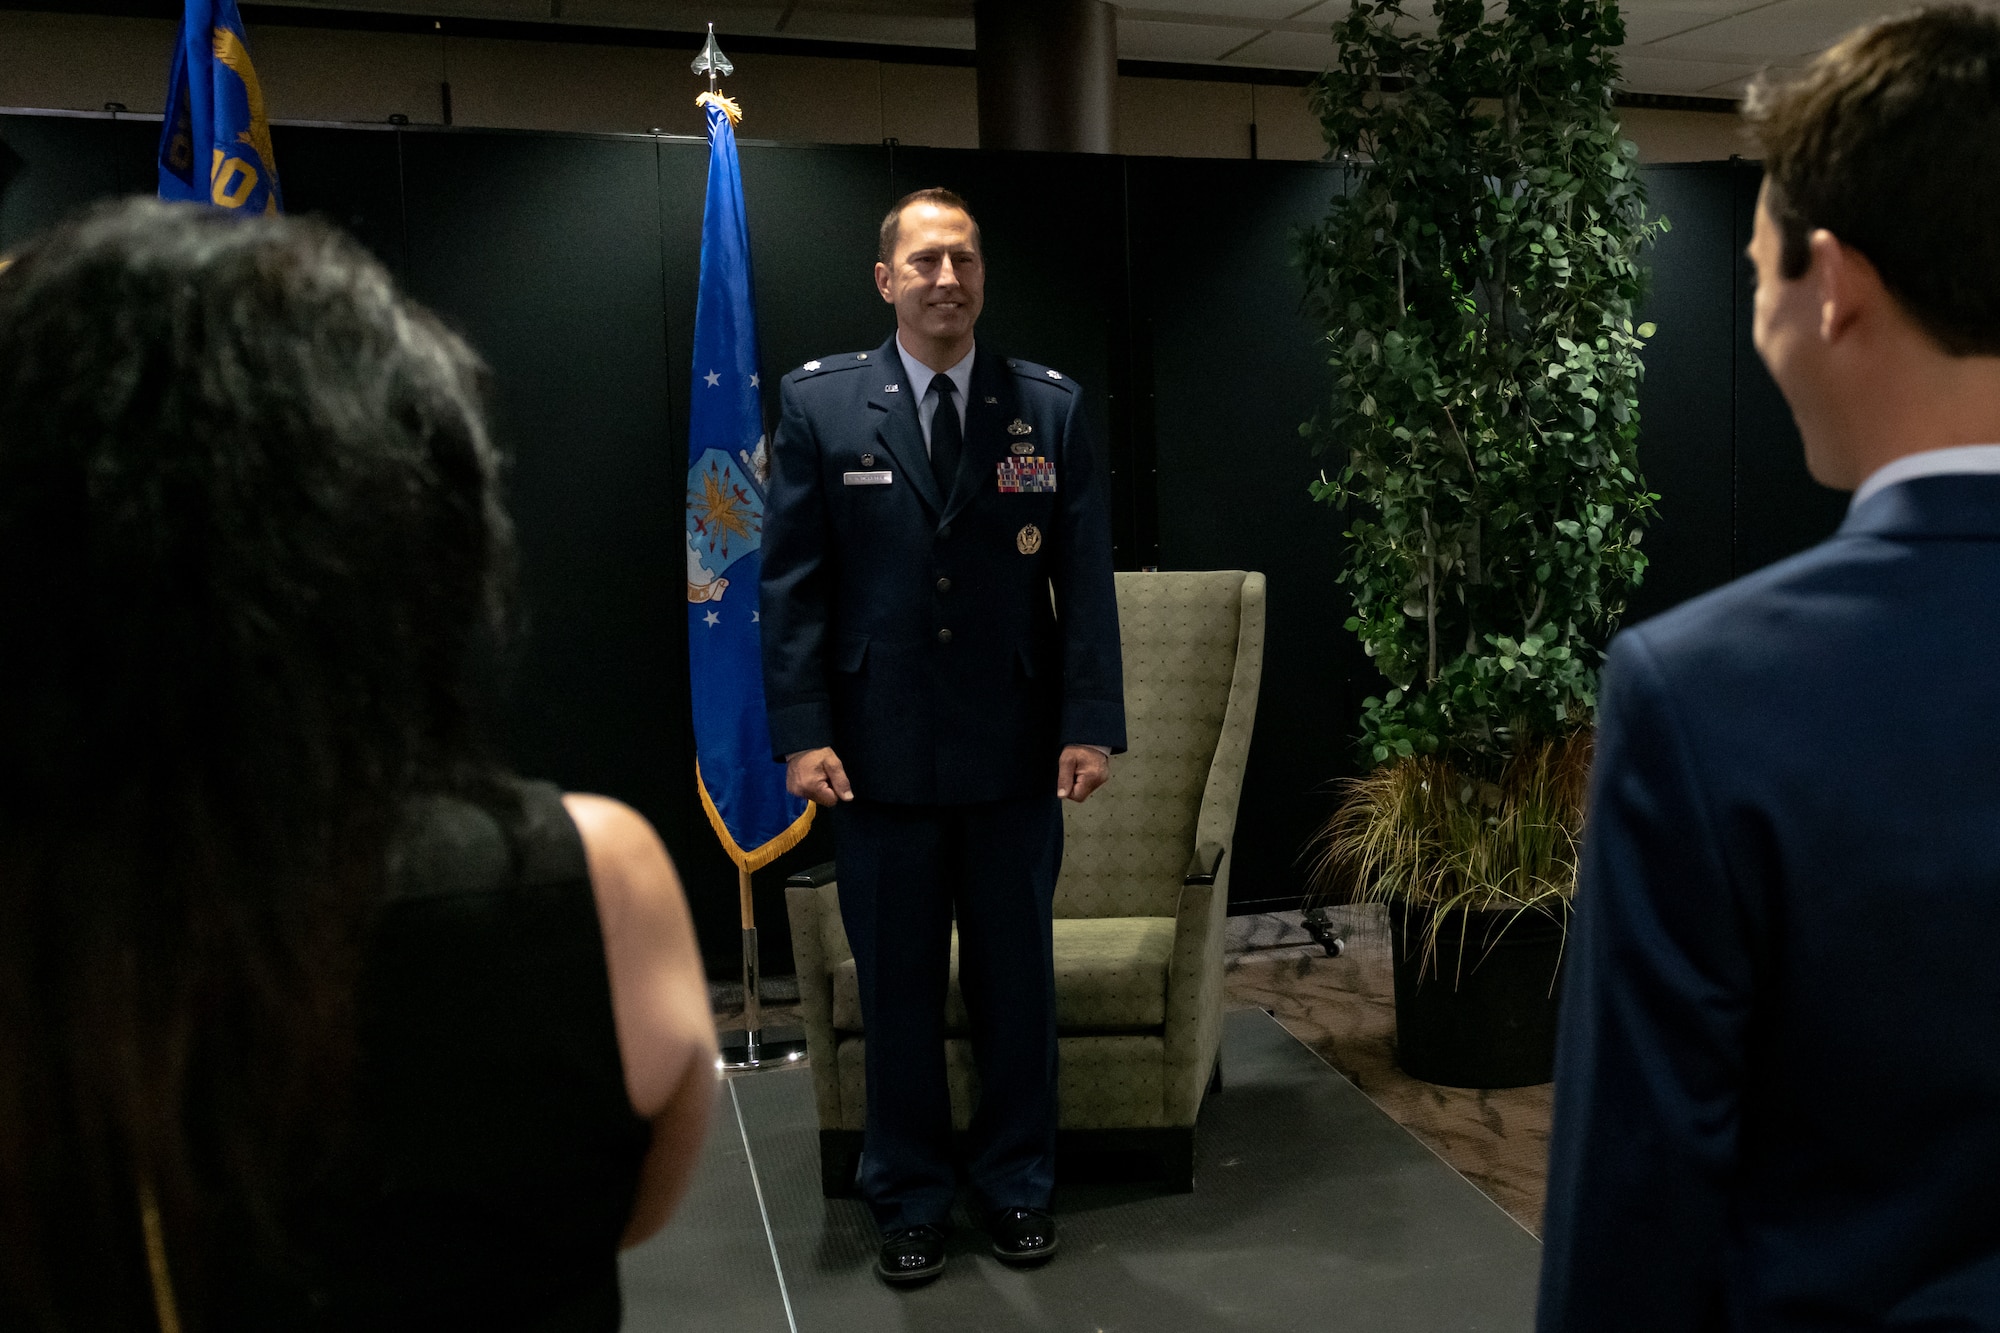 Lt. Col. Joe Winchester, the 910th Maintenance Group commander, officially assumed command of the 910th MXG, Sept. 12, 2020, at Youngstown Air Reserve Station. Winchester replaced the outgoing commander, Col. Sharon Johnson.